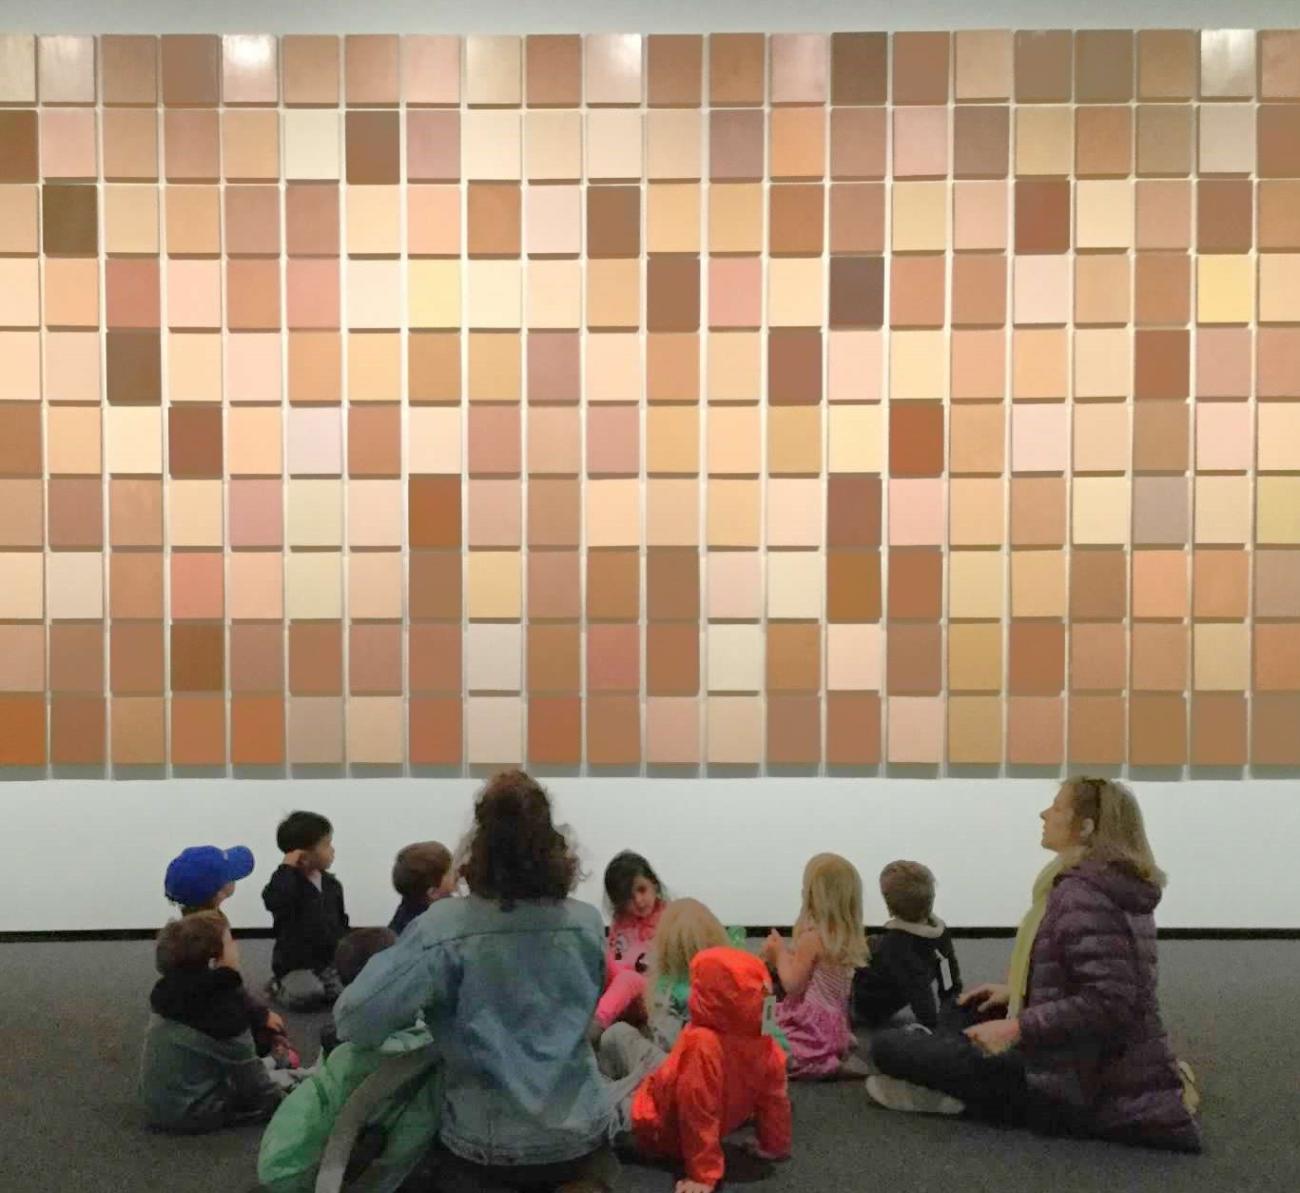 Children look up at an art installation of squares in different shades of flesh tones